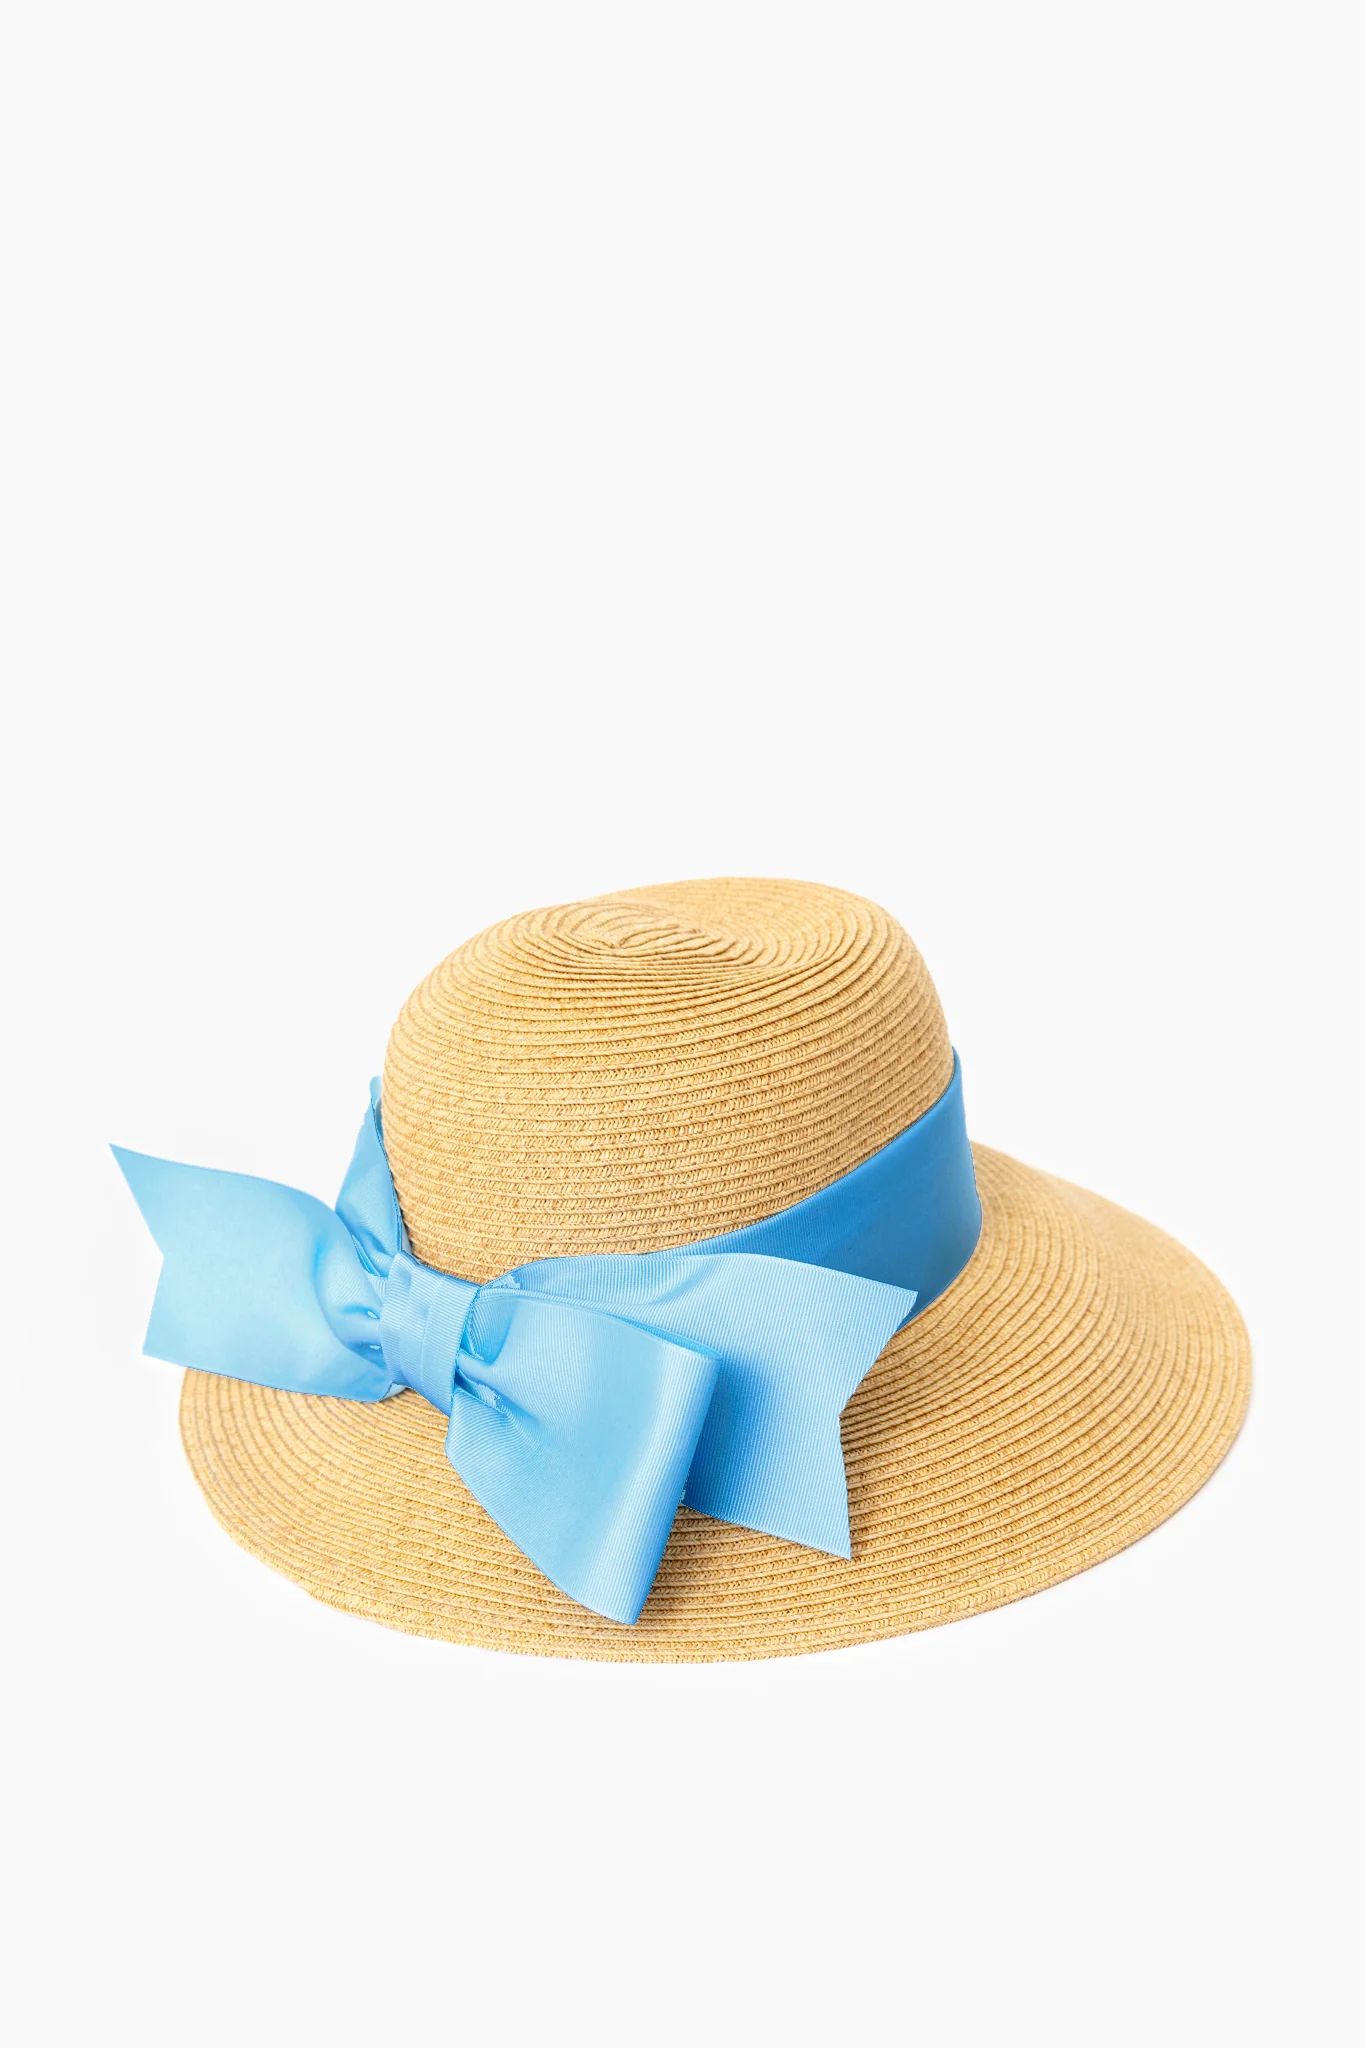 Exclusive Blue Packable Wide Bow Sunhat | Tuckernuck (US)